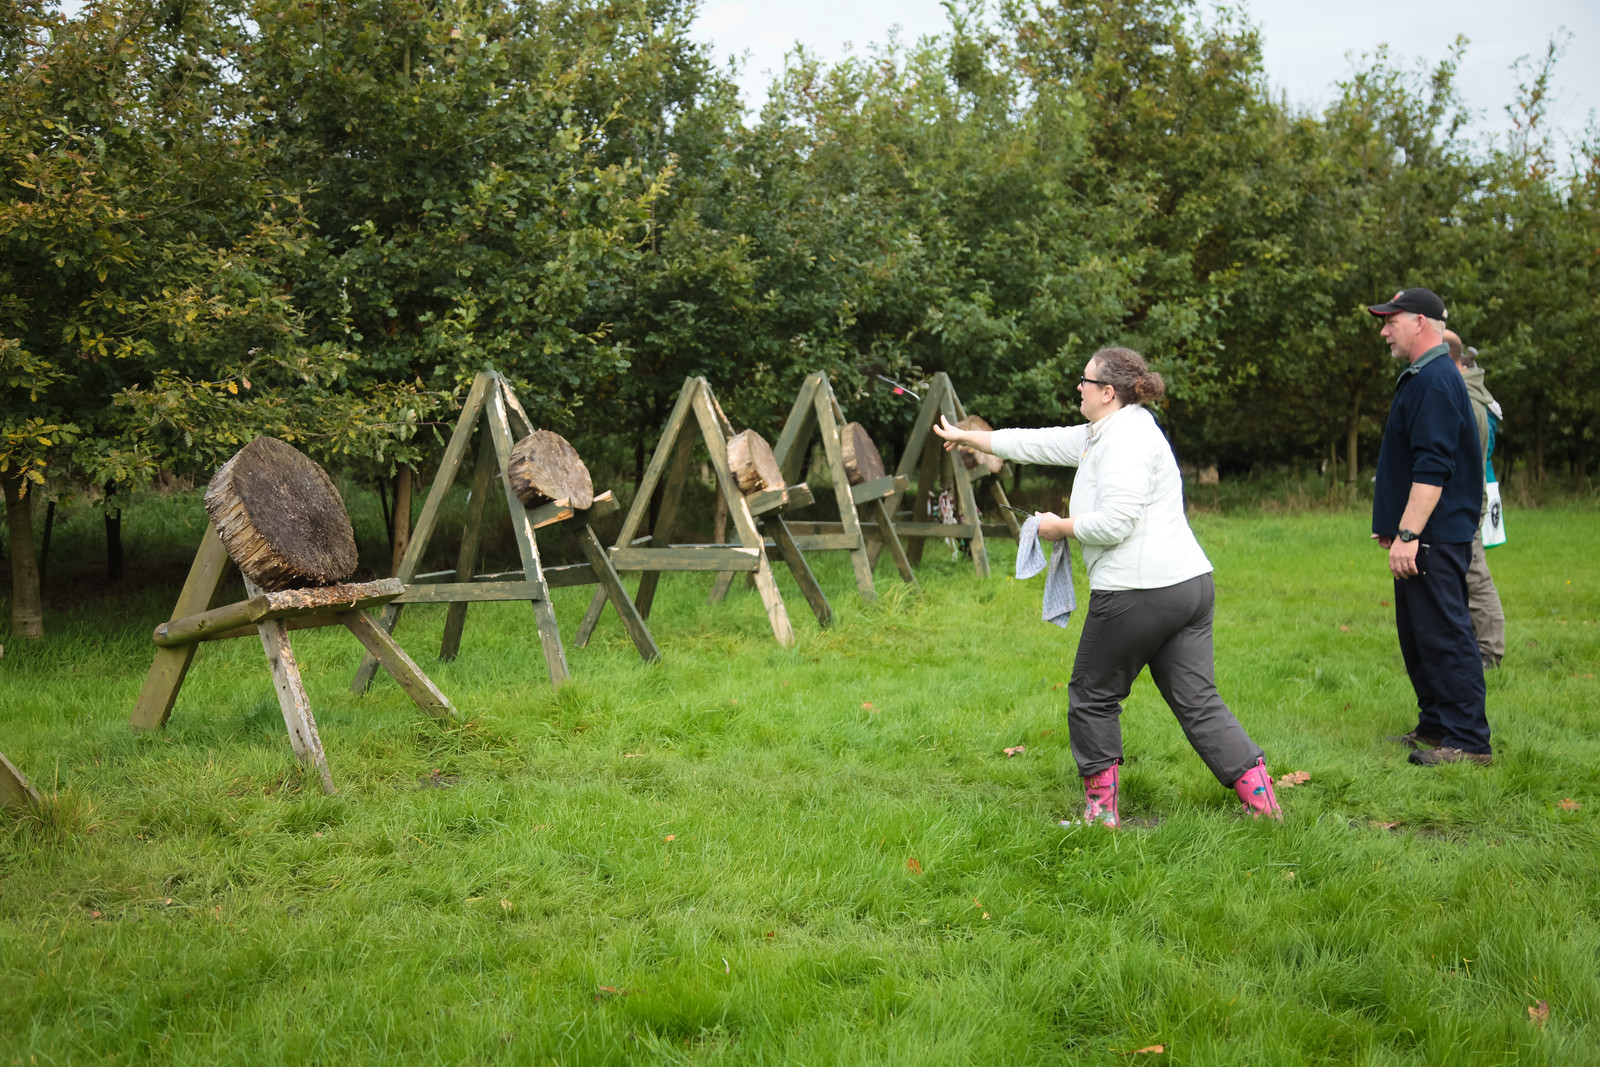 Tomahawk Throwing Course - 7th May 2022